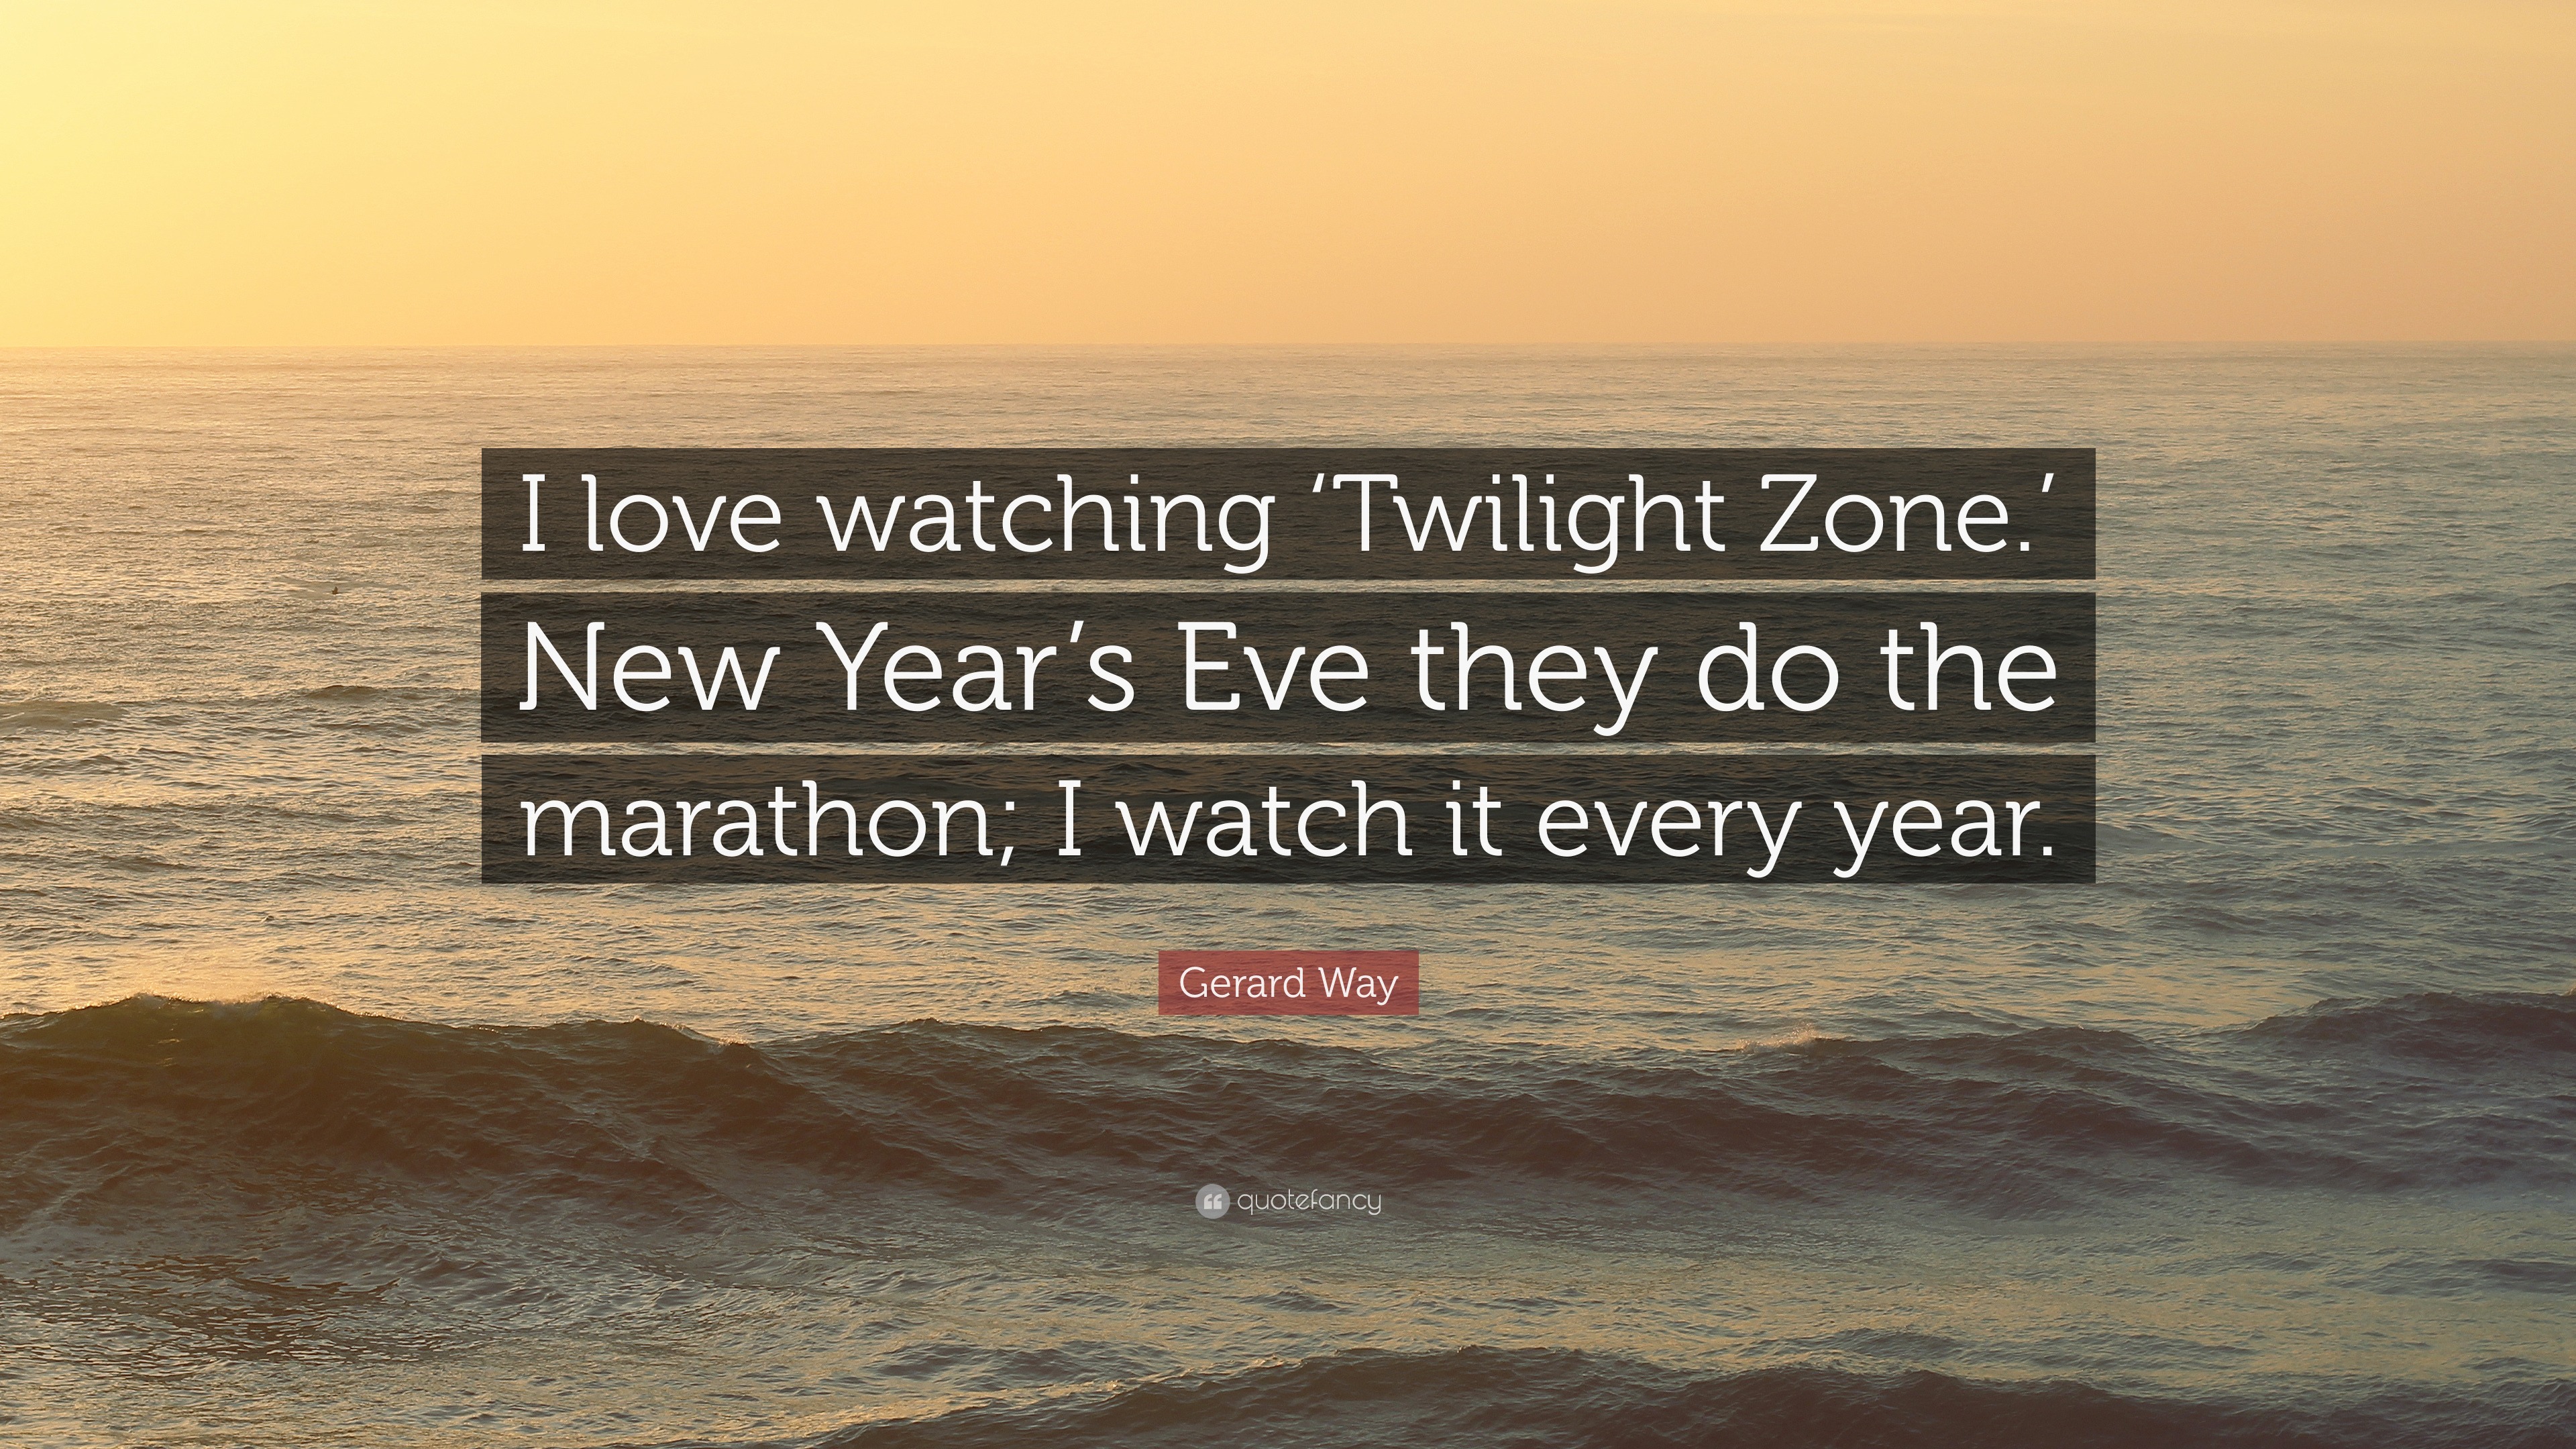 Gerard Way Quote “I love watching ‘Twilight Zone.’ New Year’s Eve they